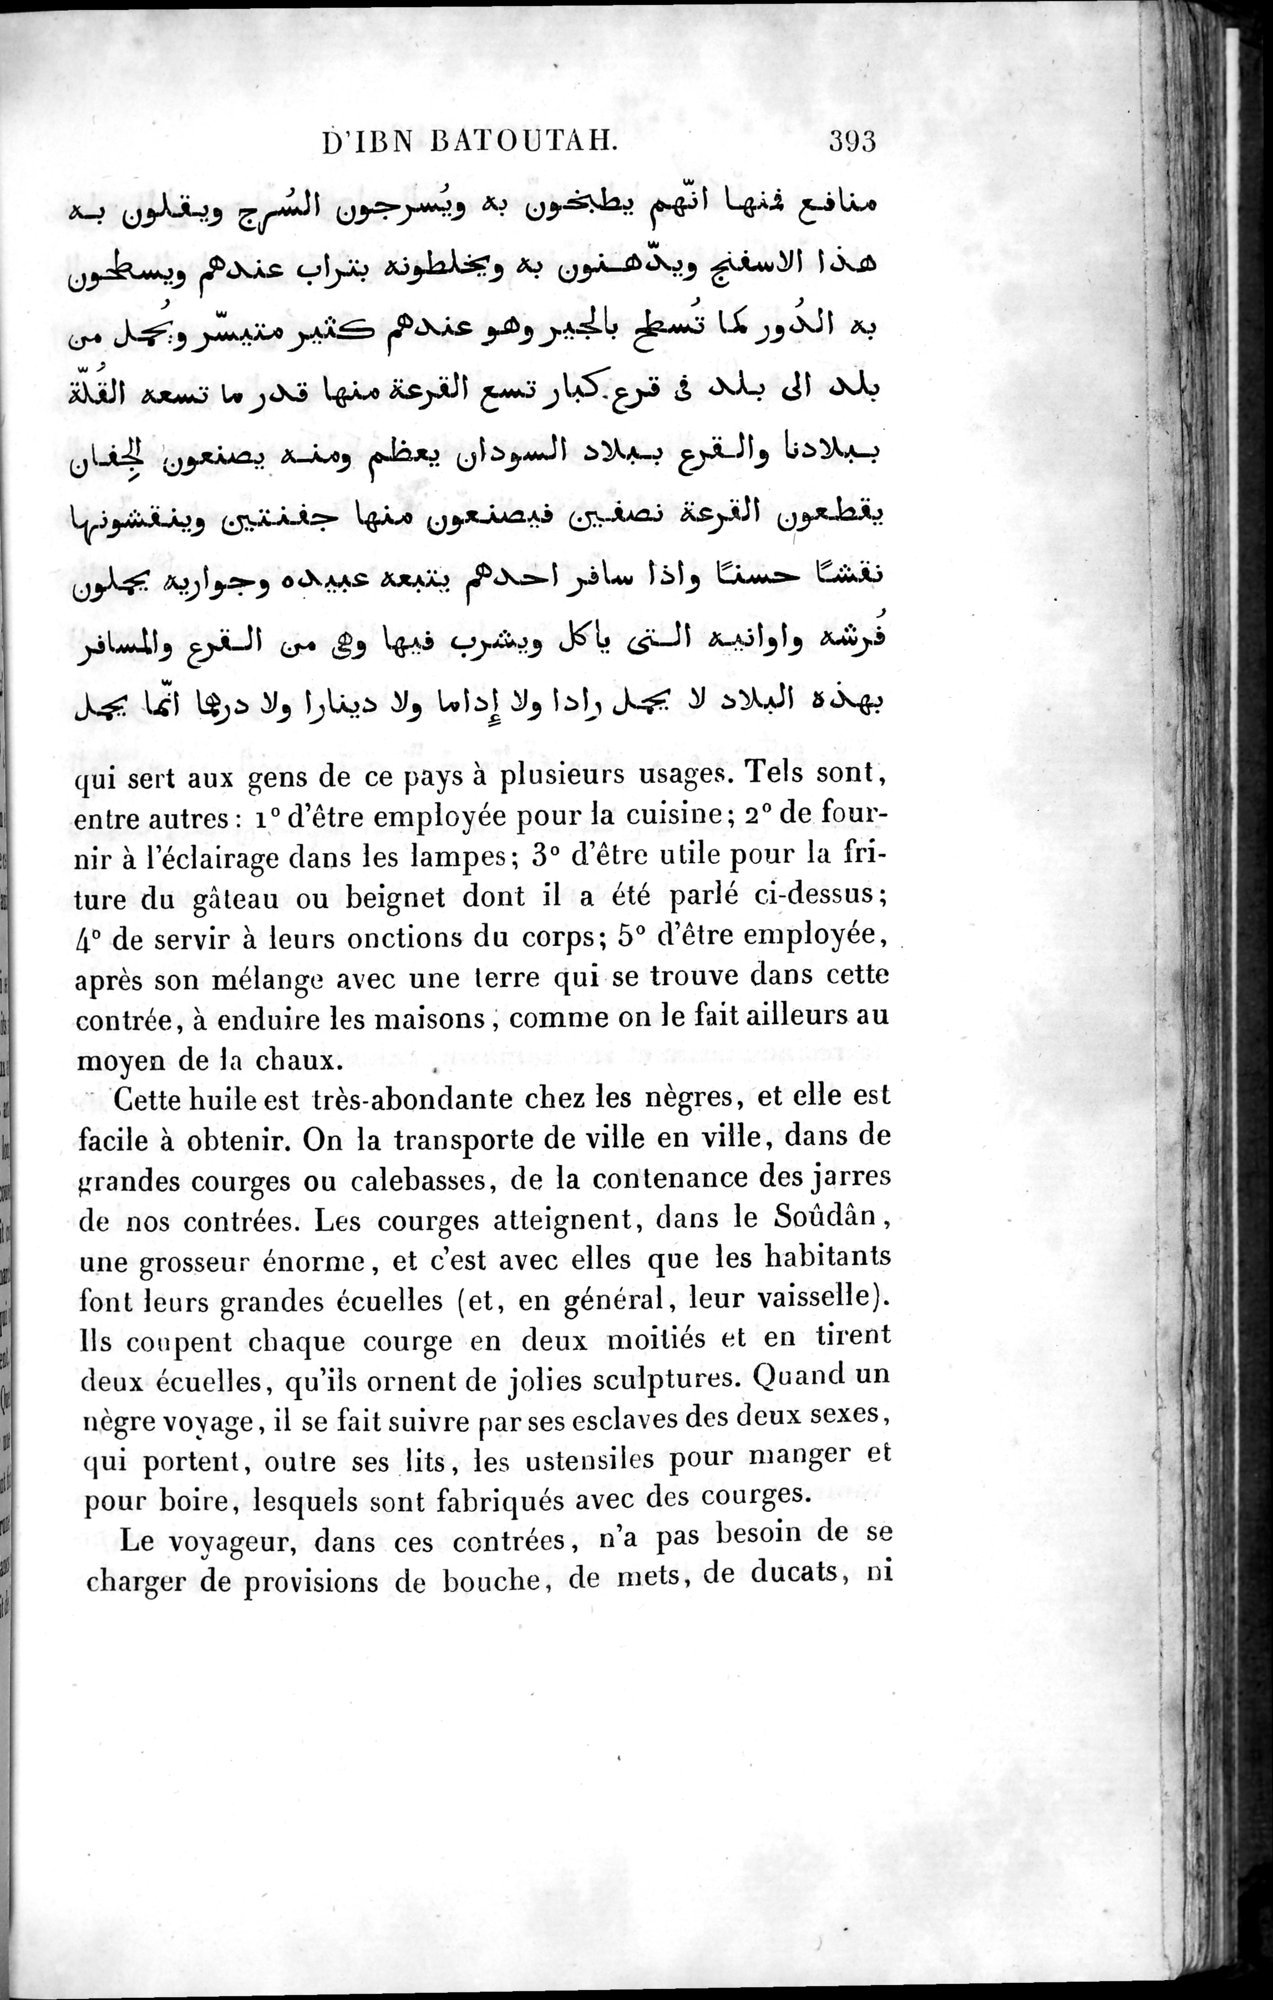 Voyages d'Ibn Batoutah : vol.4 / Page 405 (Grayscale High Resolution Image)